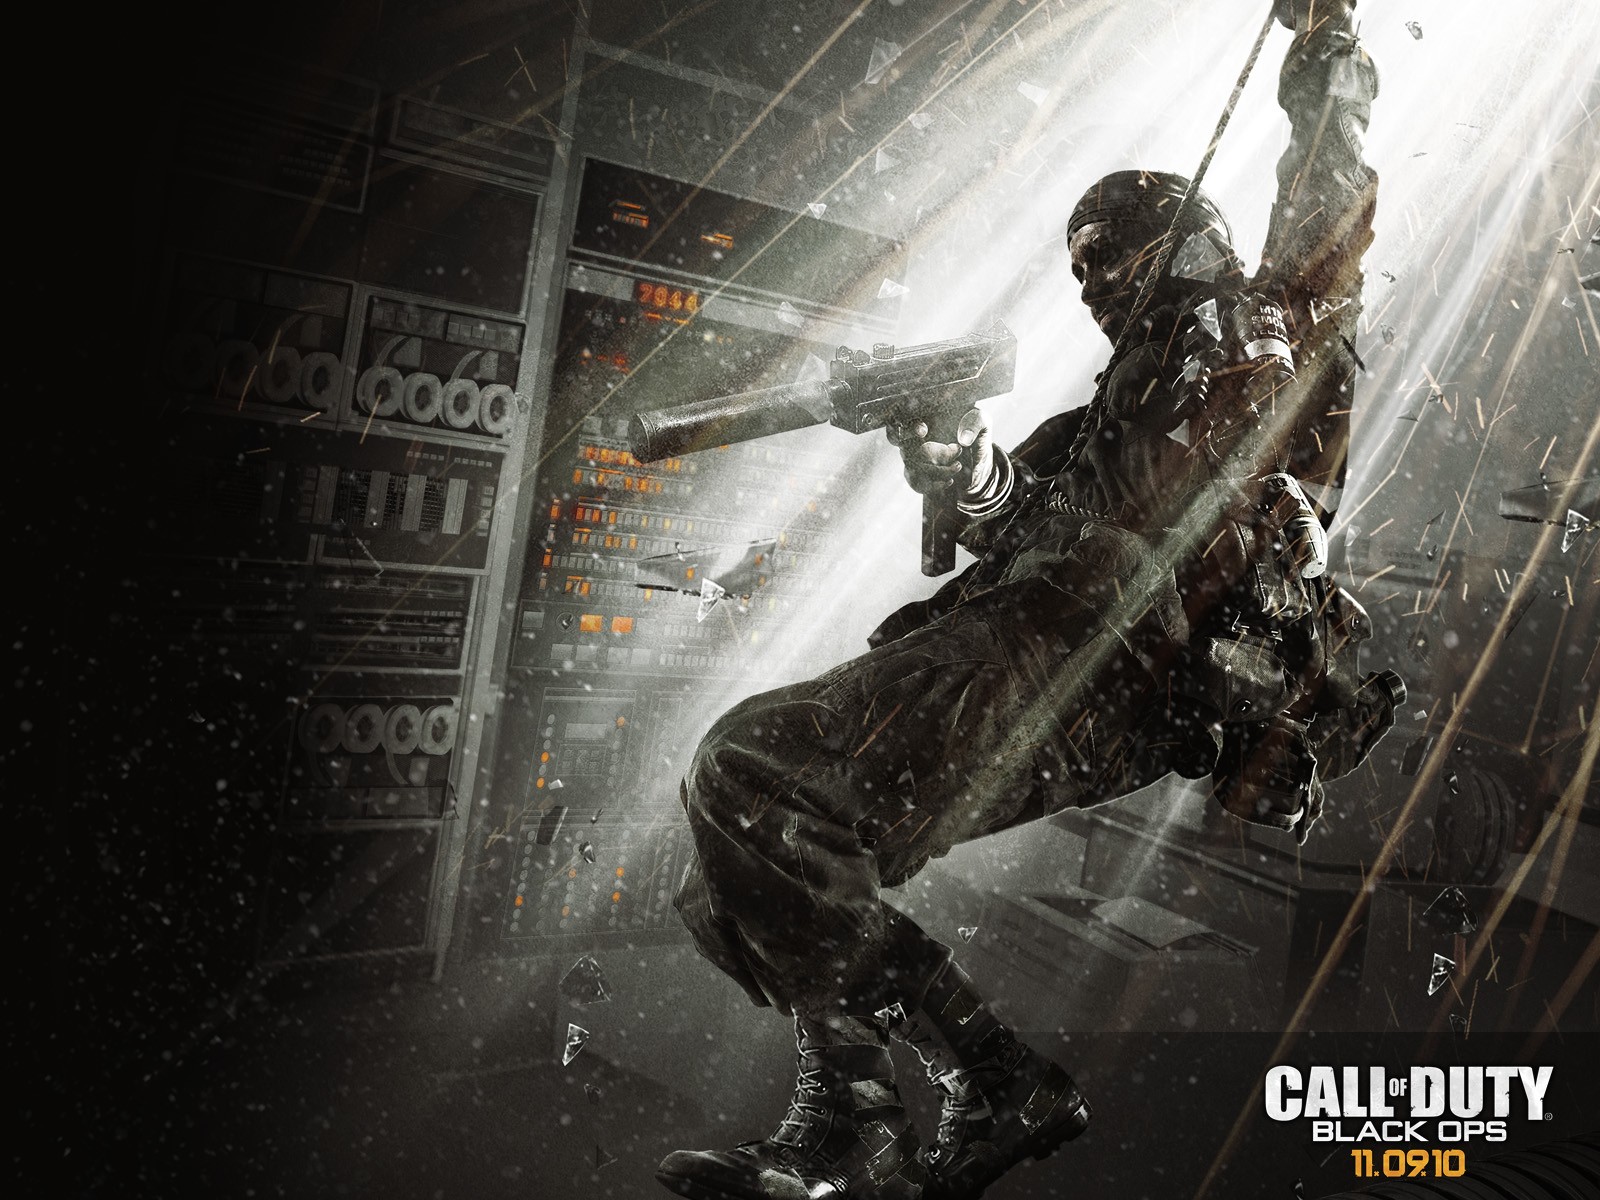 Call Of Duty Black Ops 2010 Year Soldier Weapon PC Gaming 1600x1200